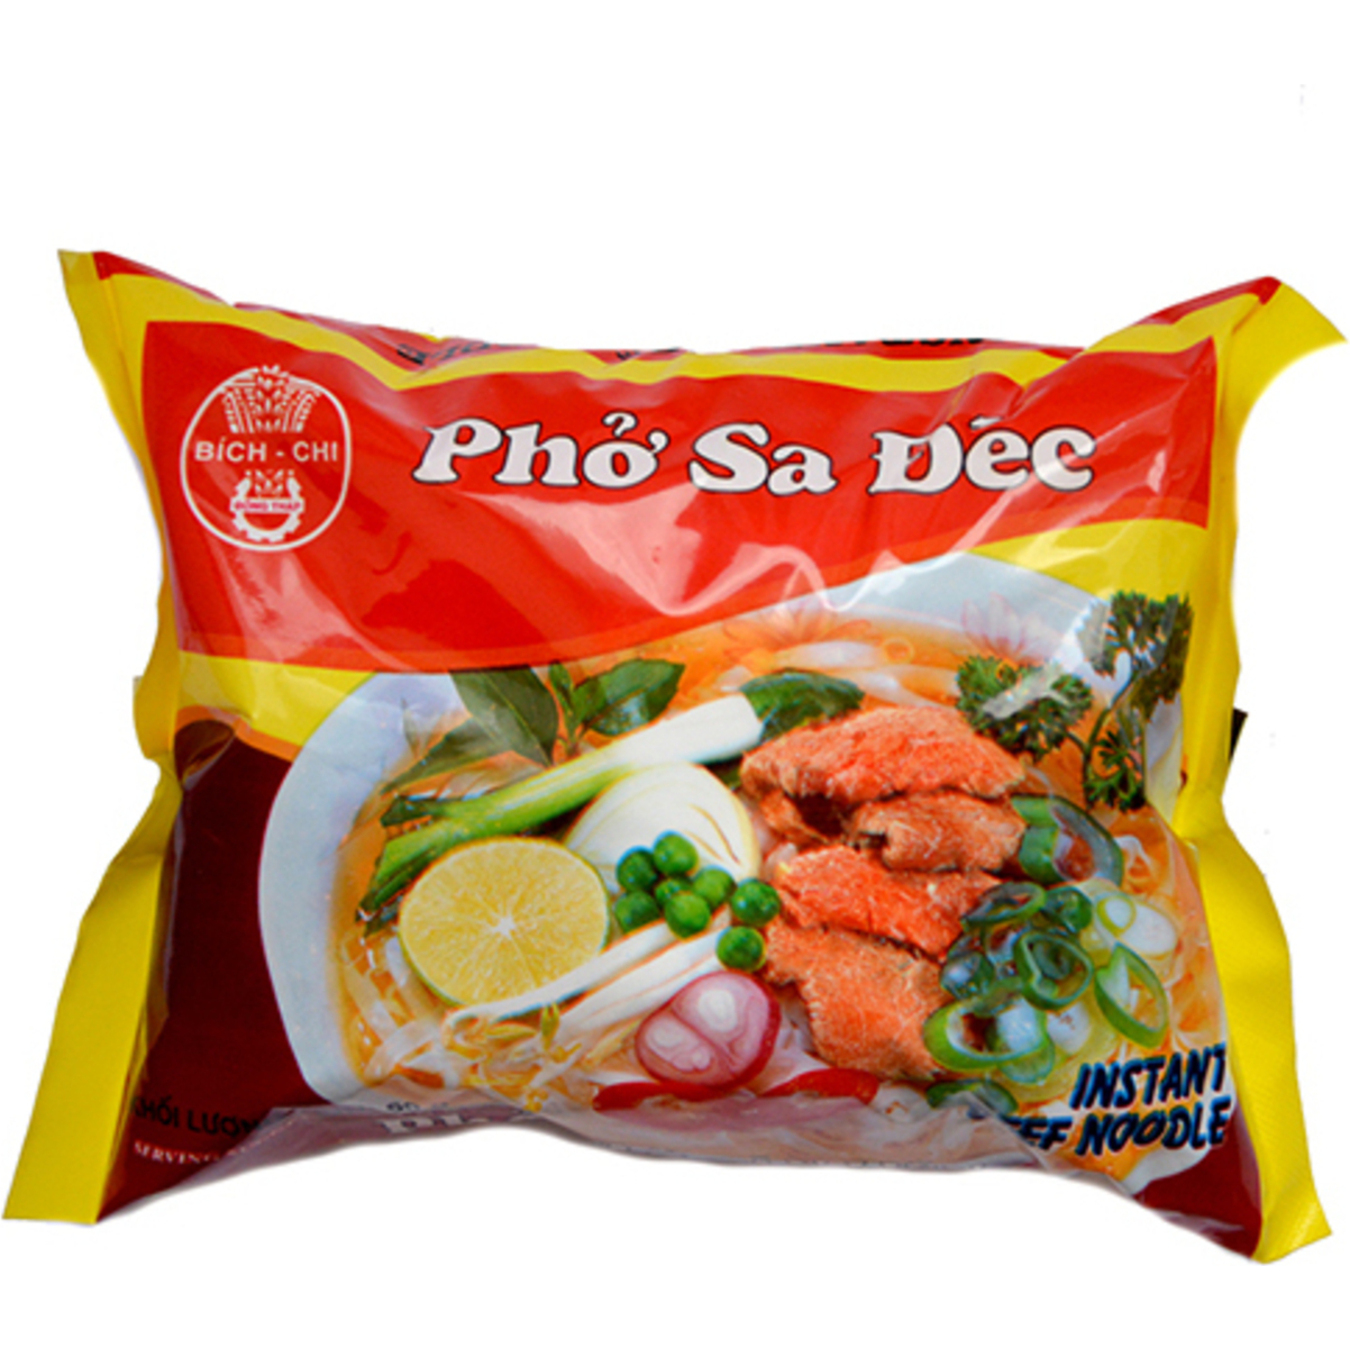 Bich Chi Rice Noodles with Beef Flavor 60g